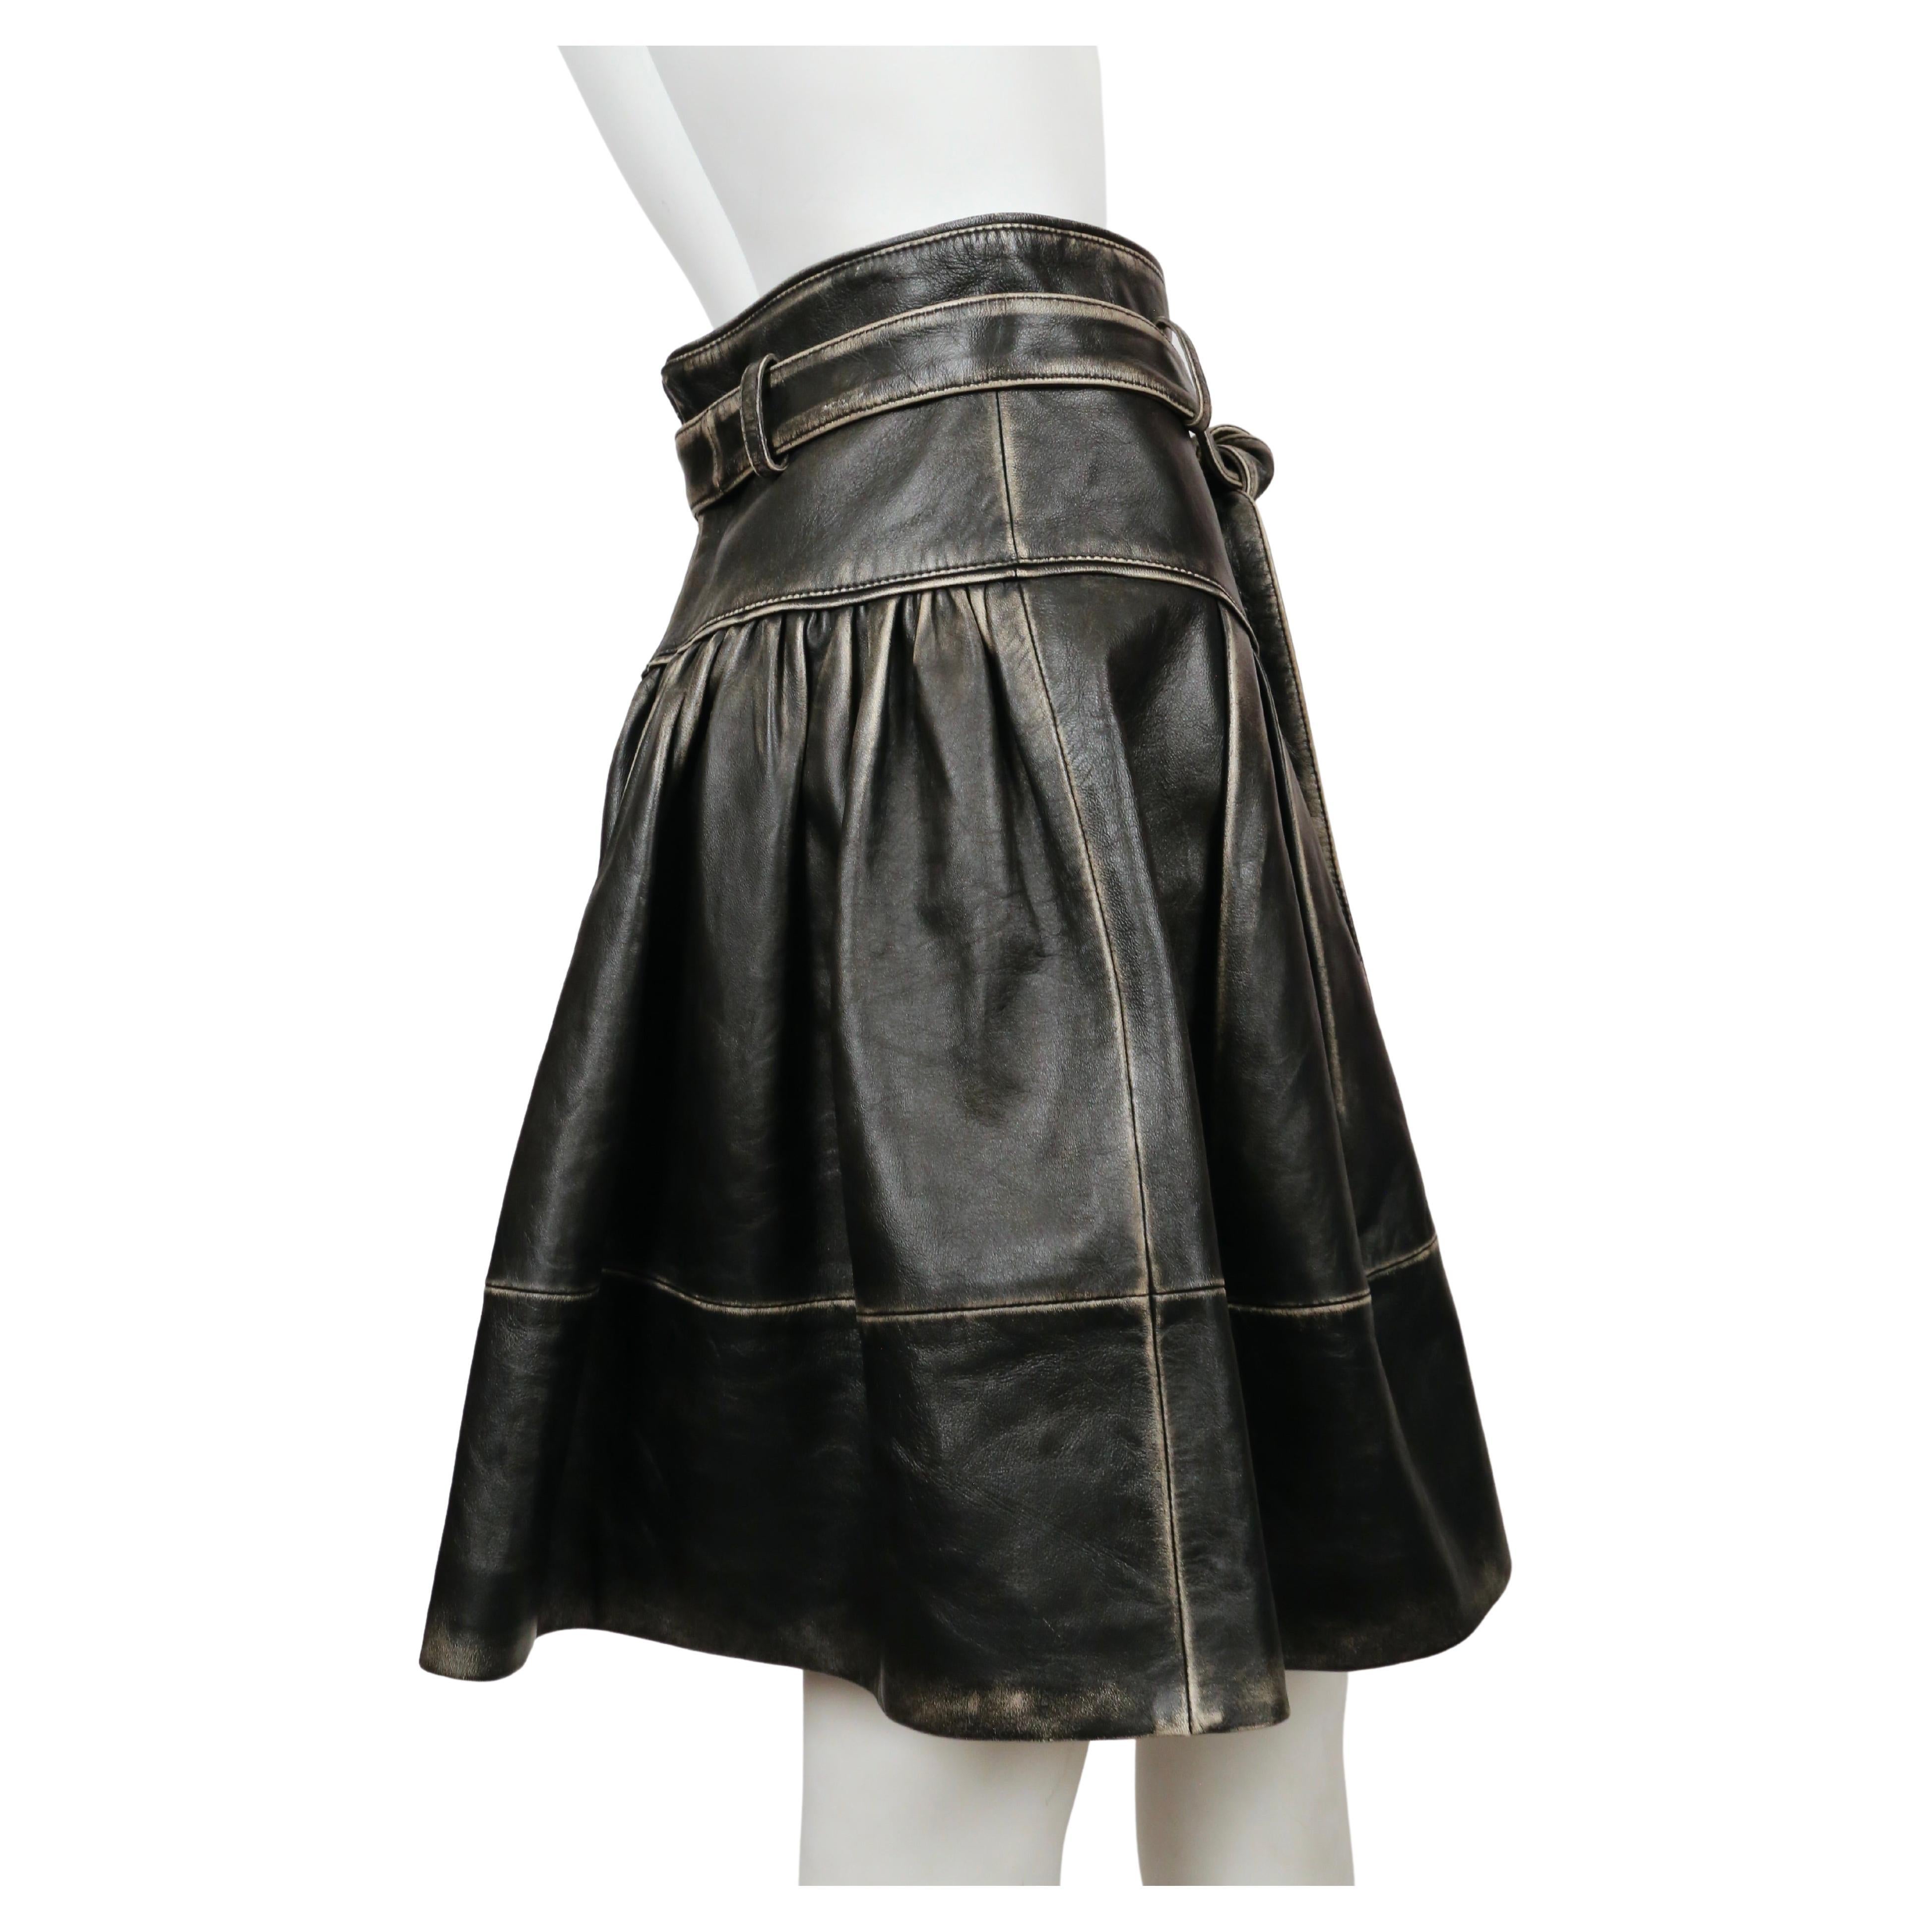 2018 MIU MIU distressed leather skirt with belt In Excellent Condition For Sale In San Fransisco, CA